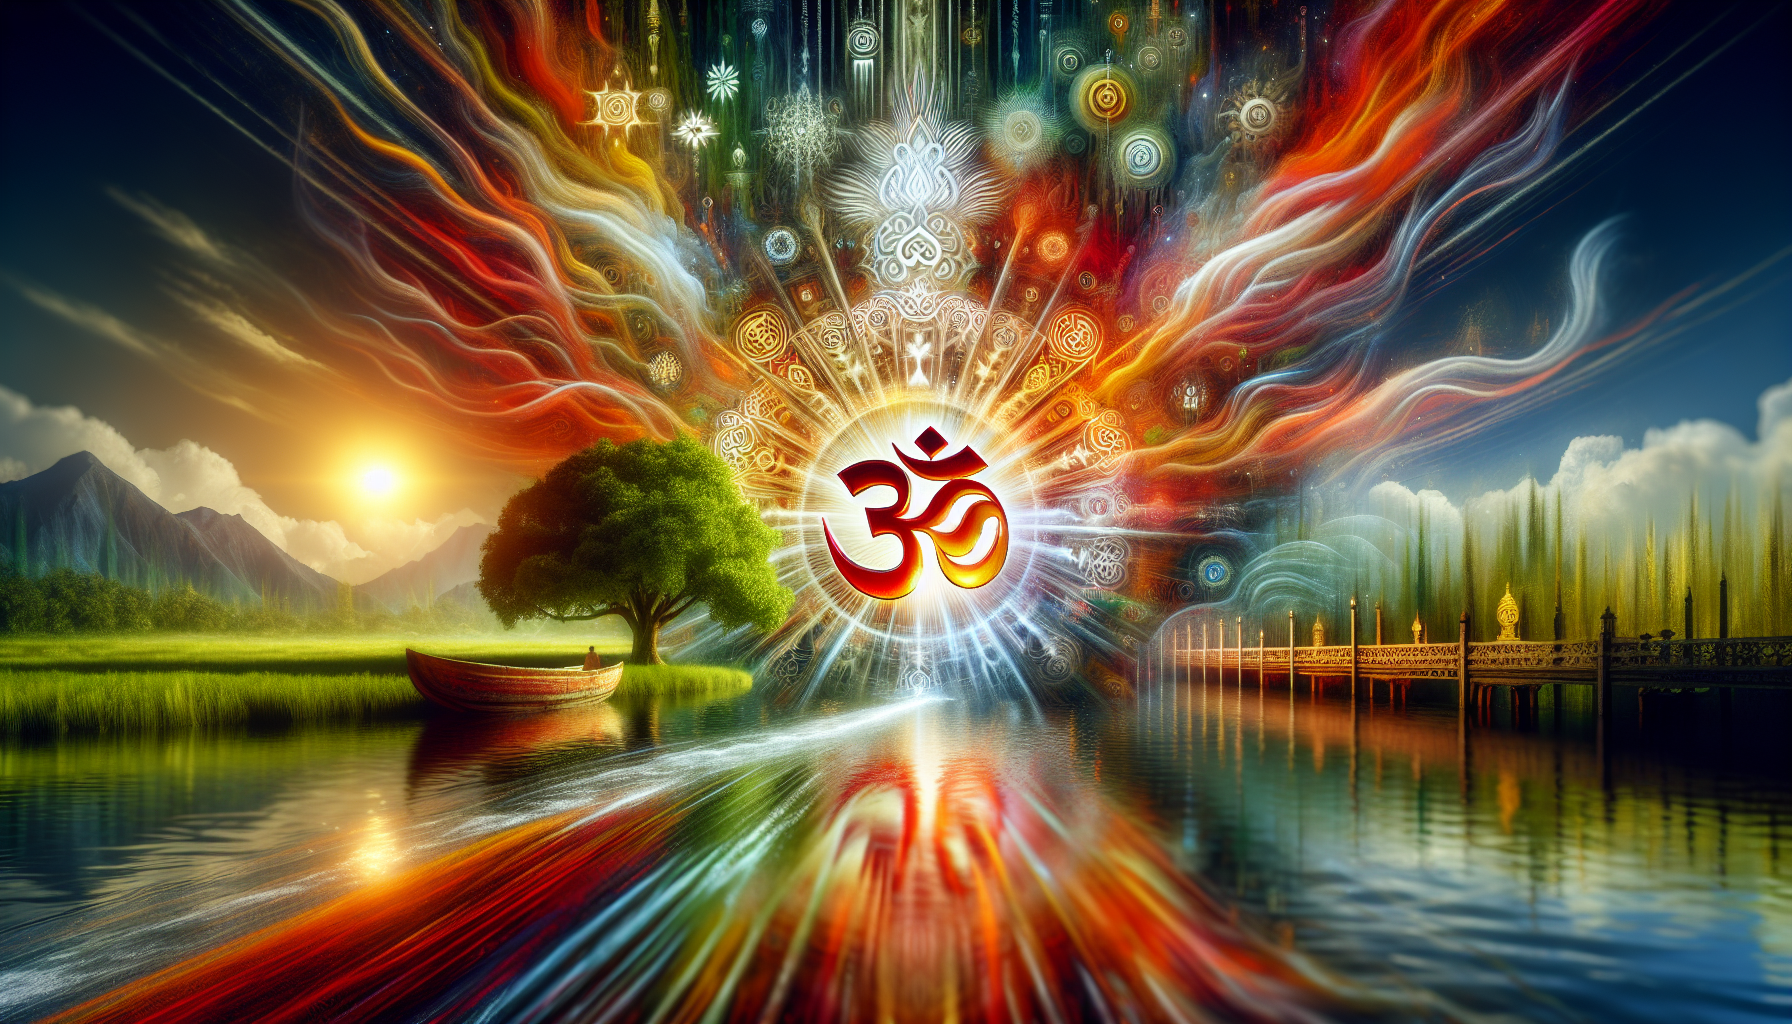 What Is The Main Symbol Of Hinduism?